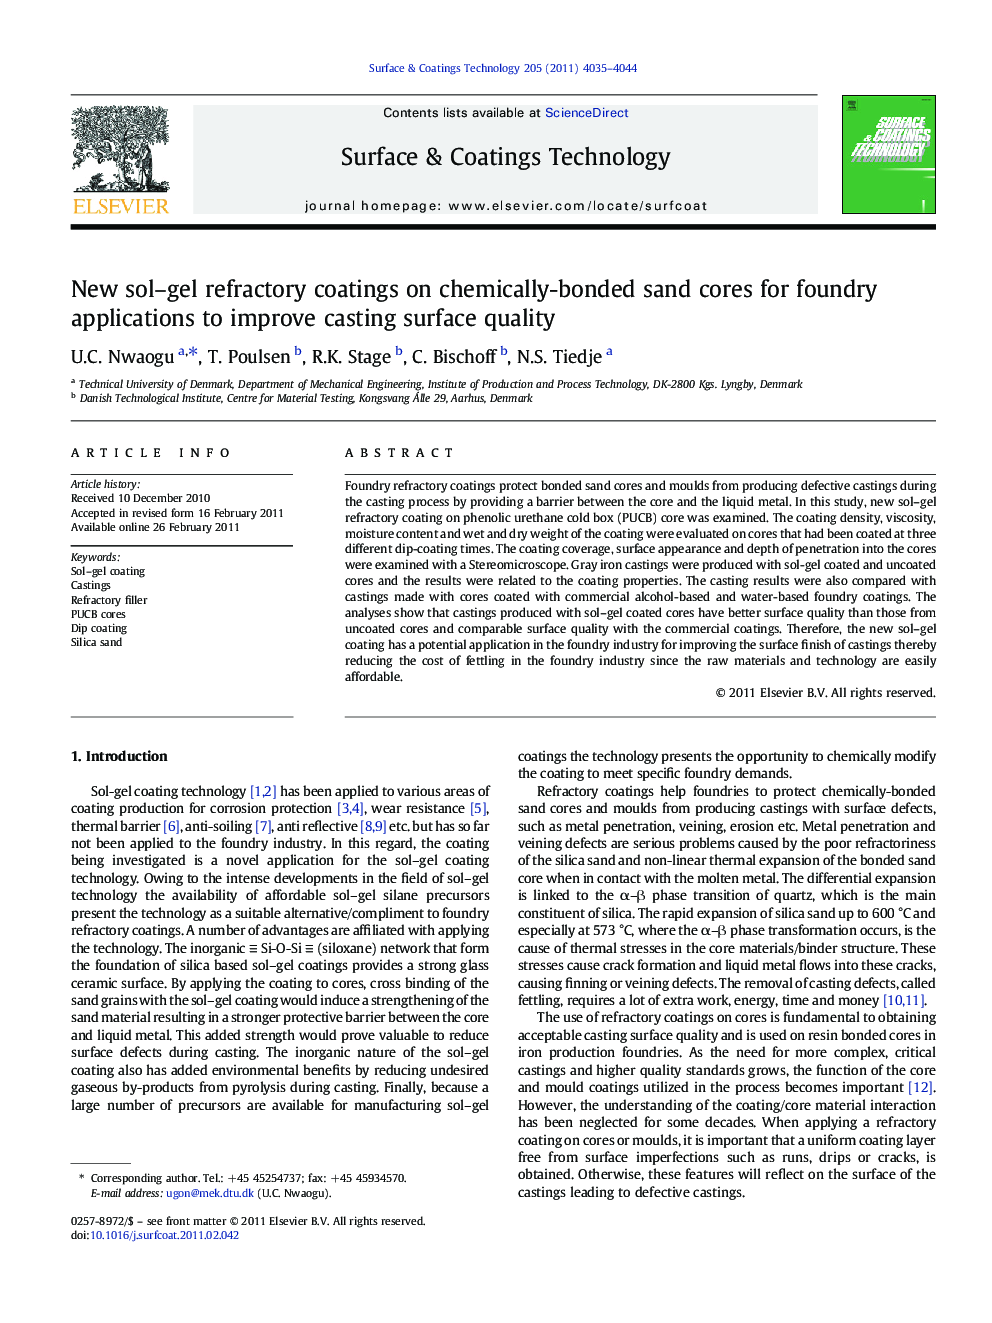 New sol–gel refractory coatings on chemically-bonded sand cores for foundry applications to improve casting surface quality